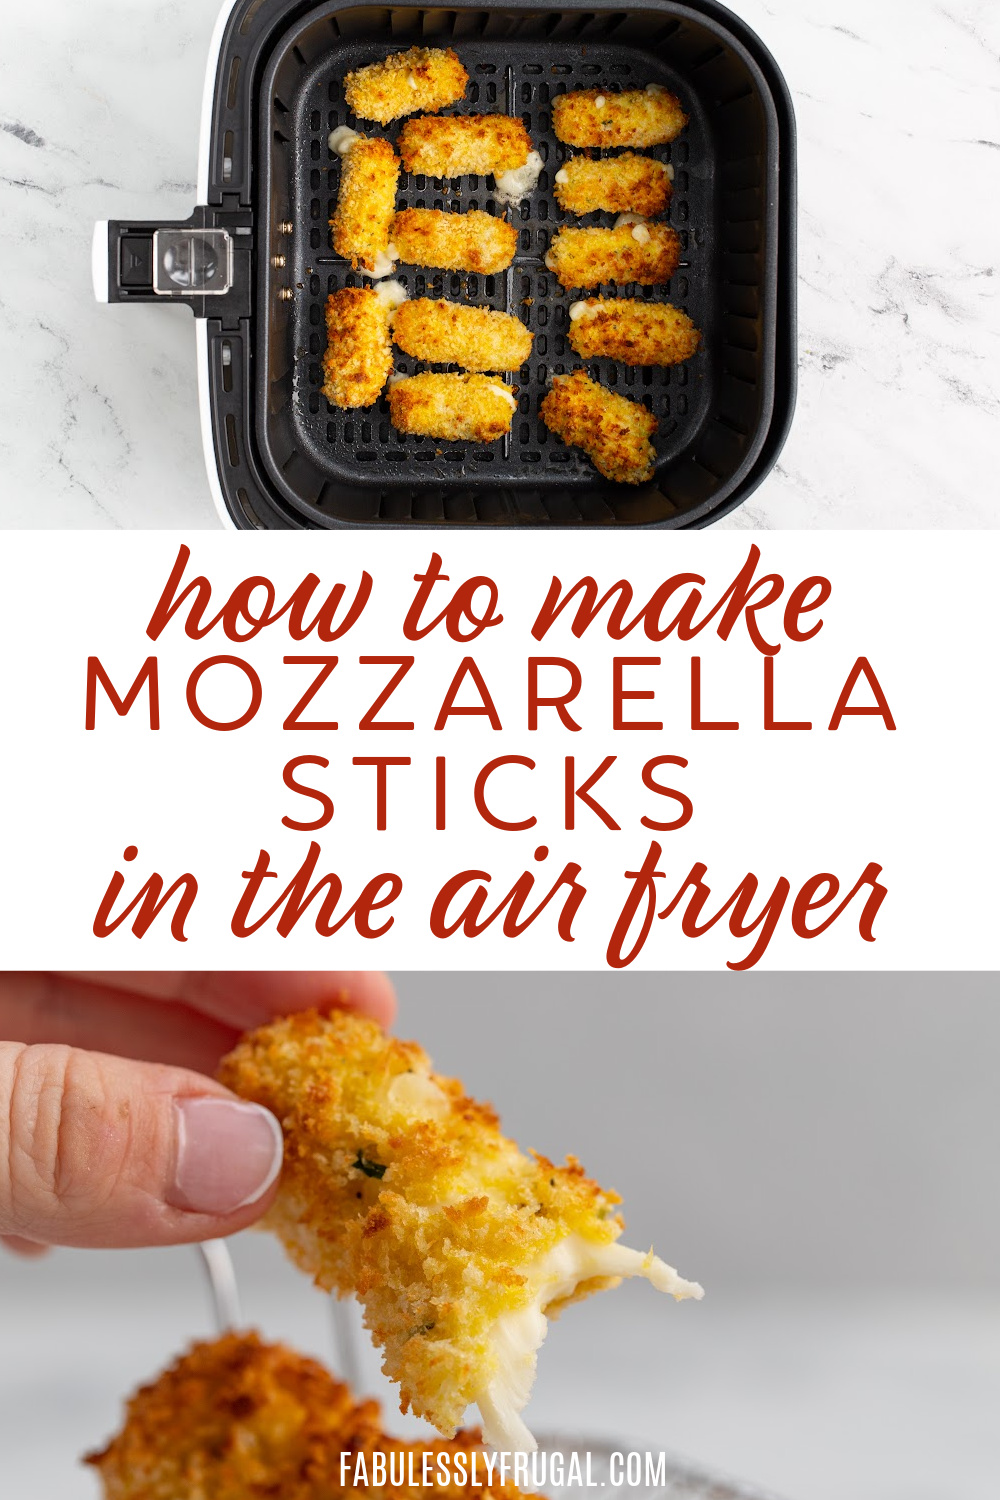 how to make mozzarella sticks in the air fryer